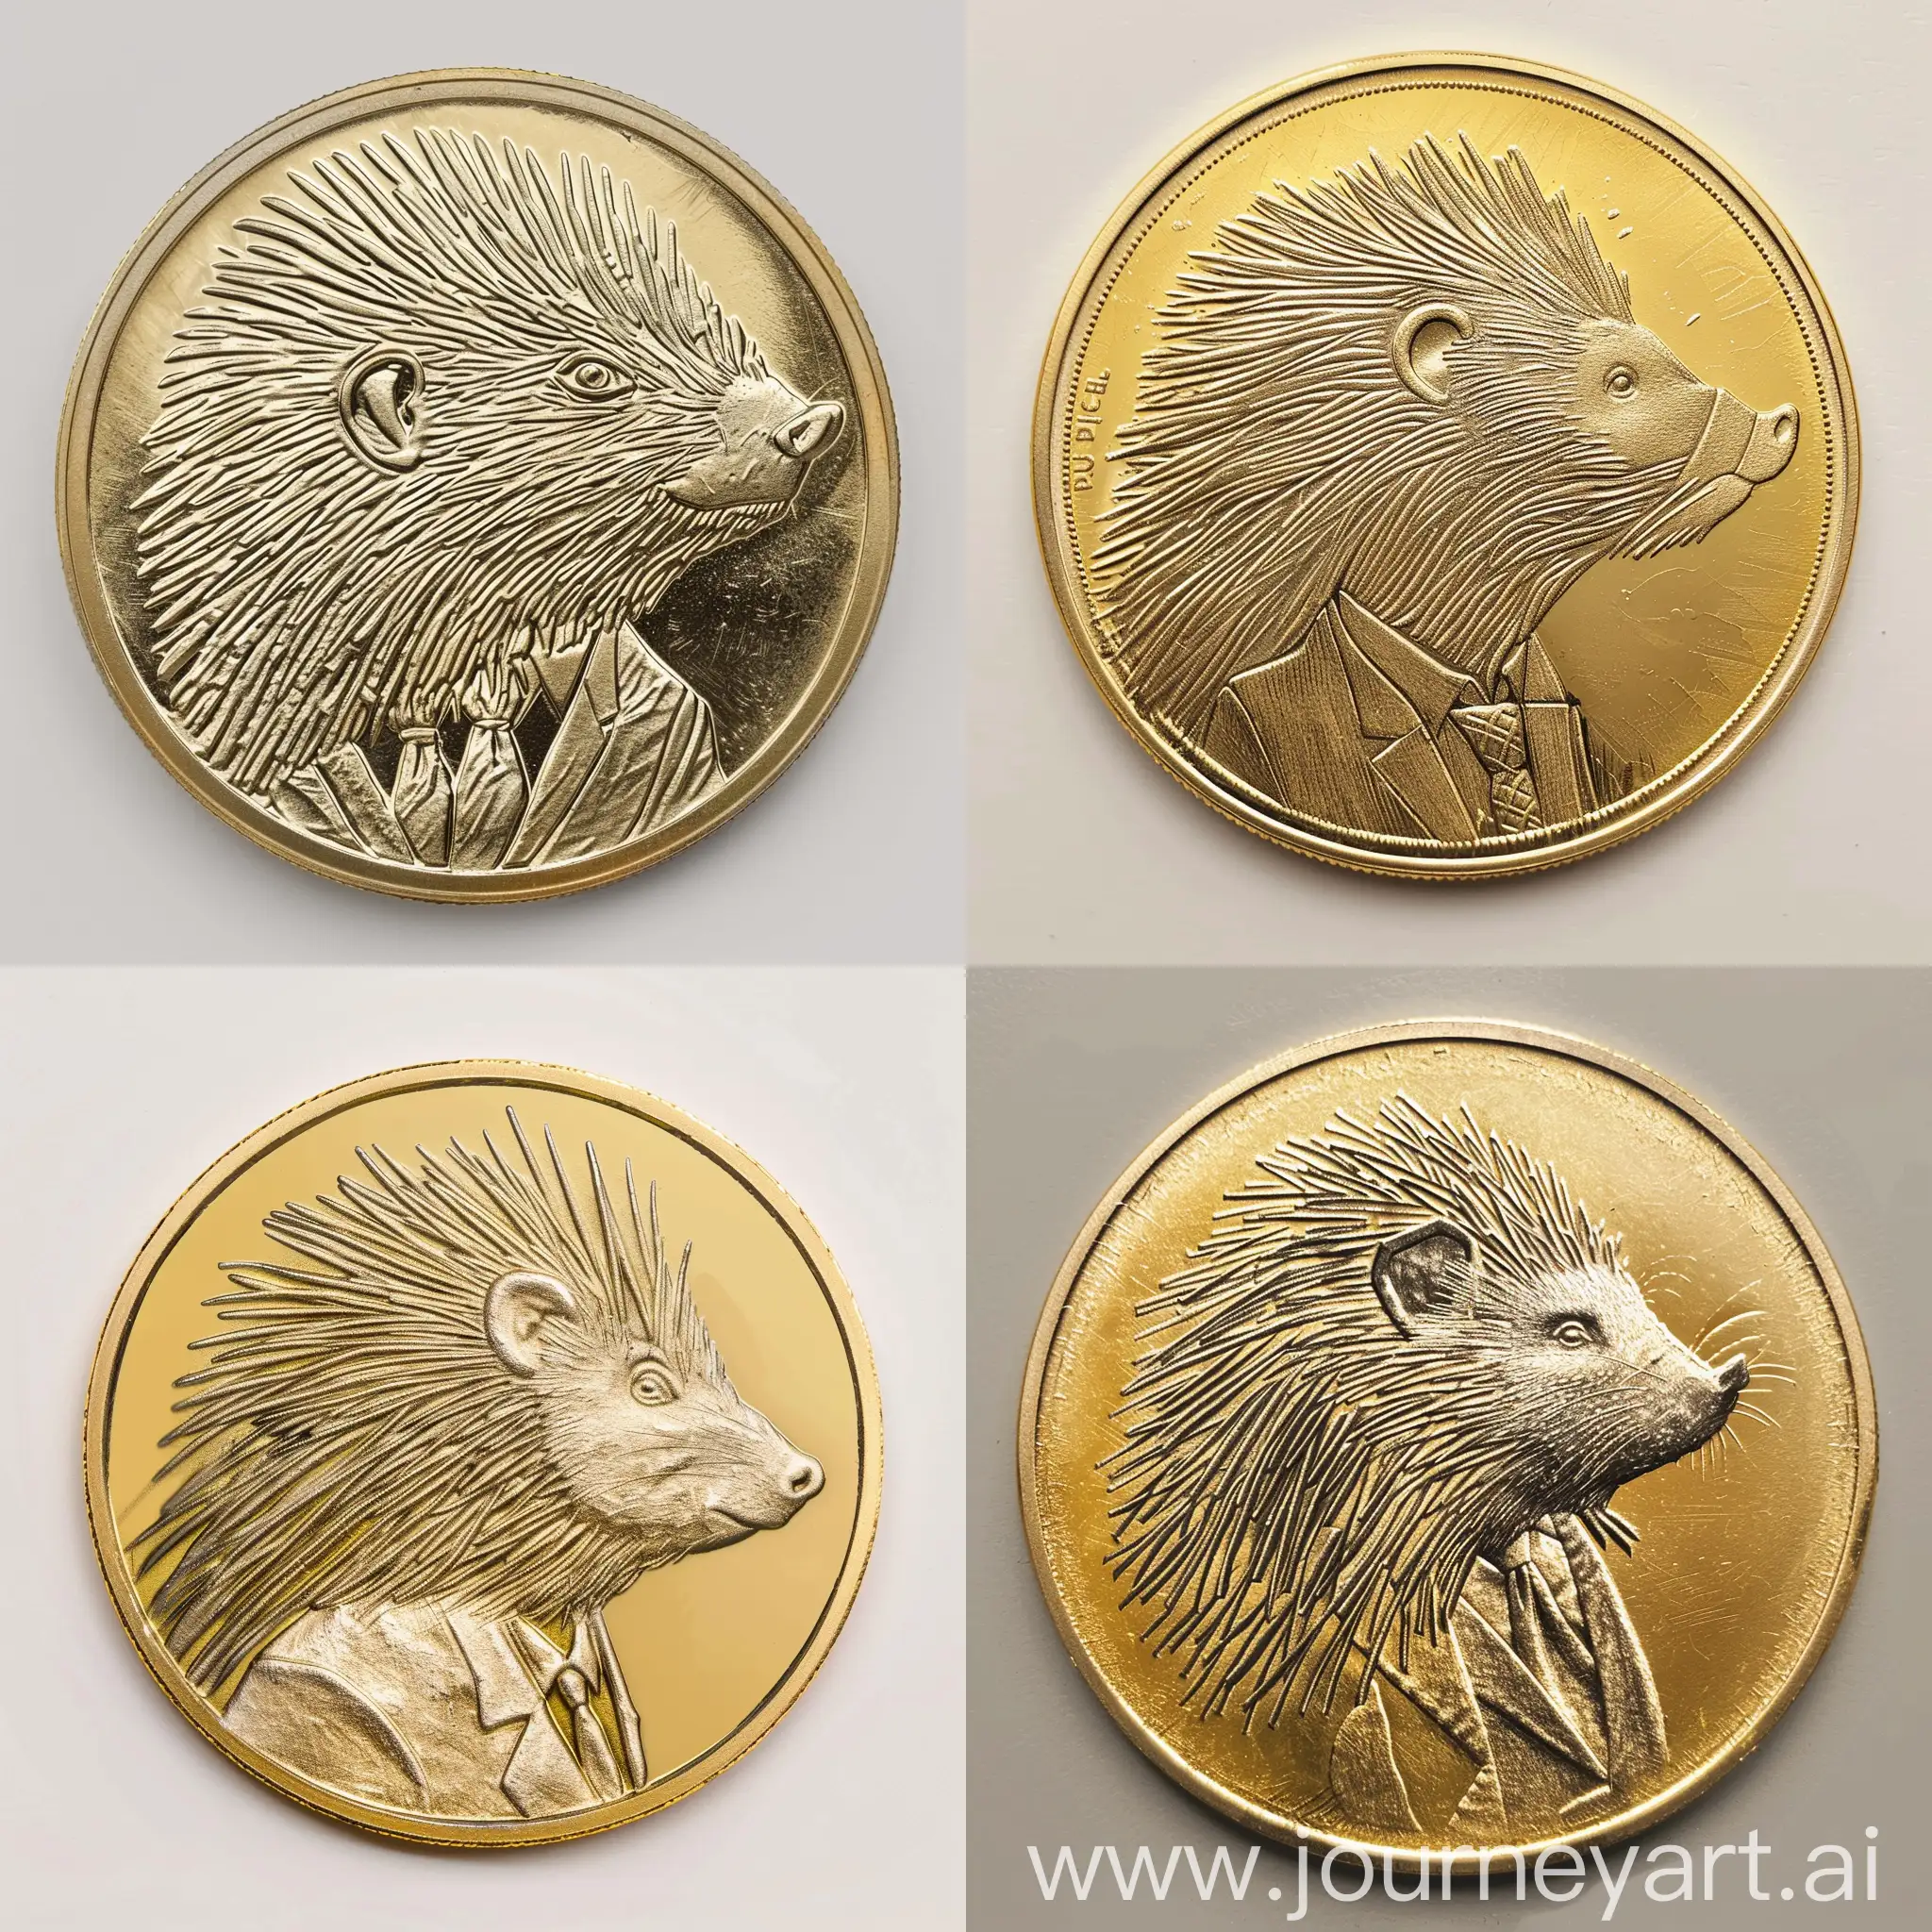 Minimalist-Gold-Coin-with-Presidential-Porcupine-Profile